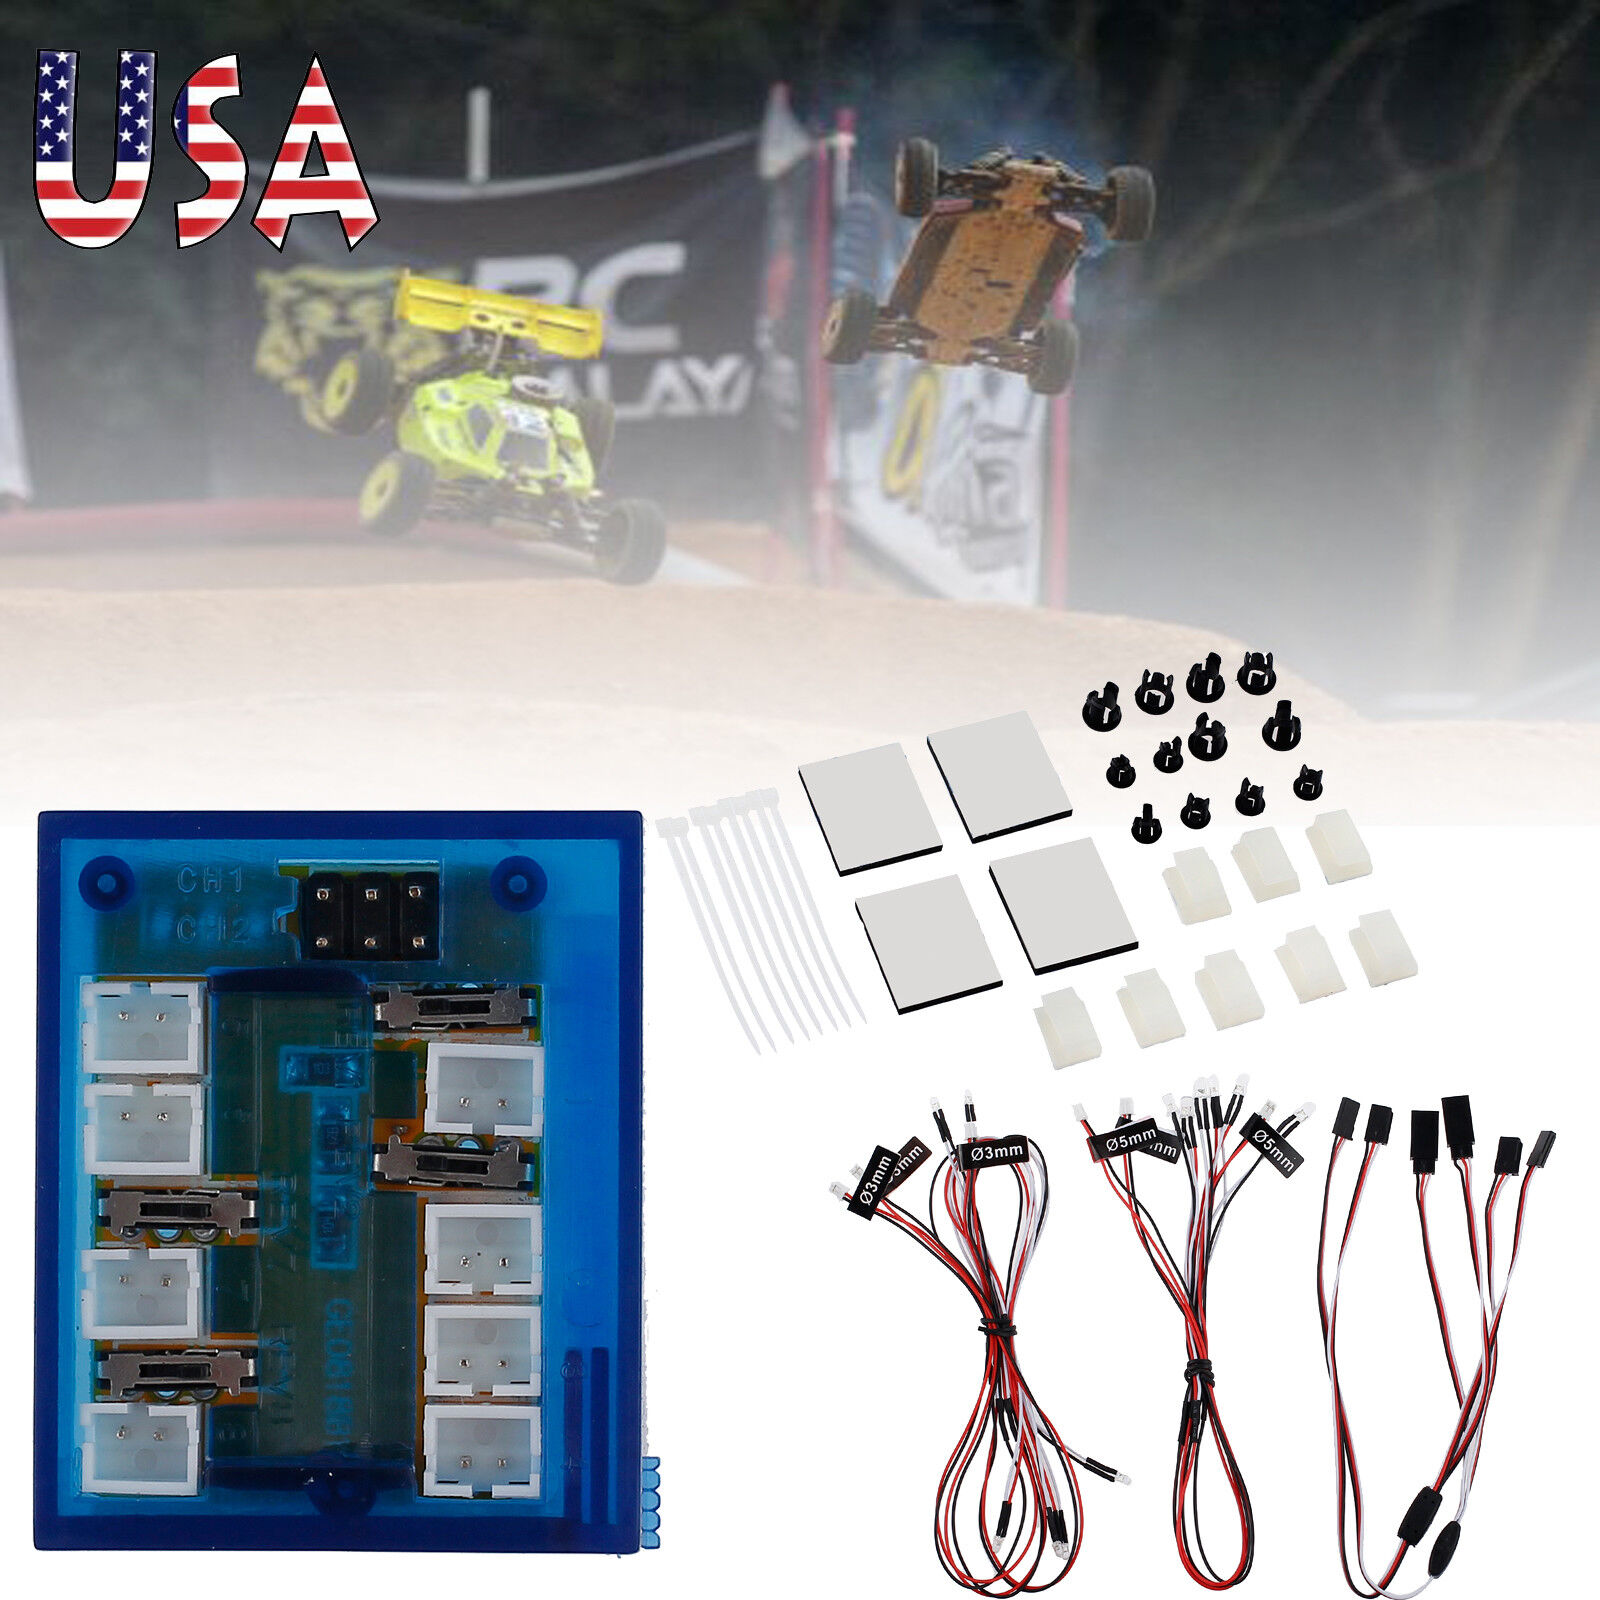 No Solder Realistic New Highlight 12 LED Lighting Kit For RC Car Truck 1/10th US Unbranded Does not apply